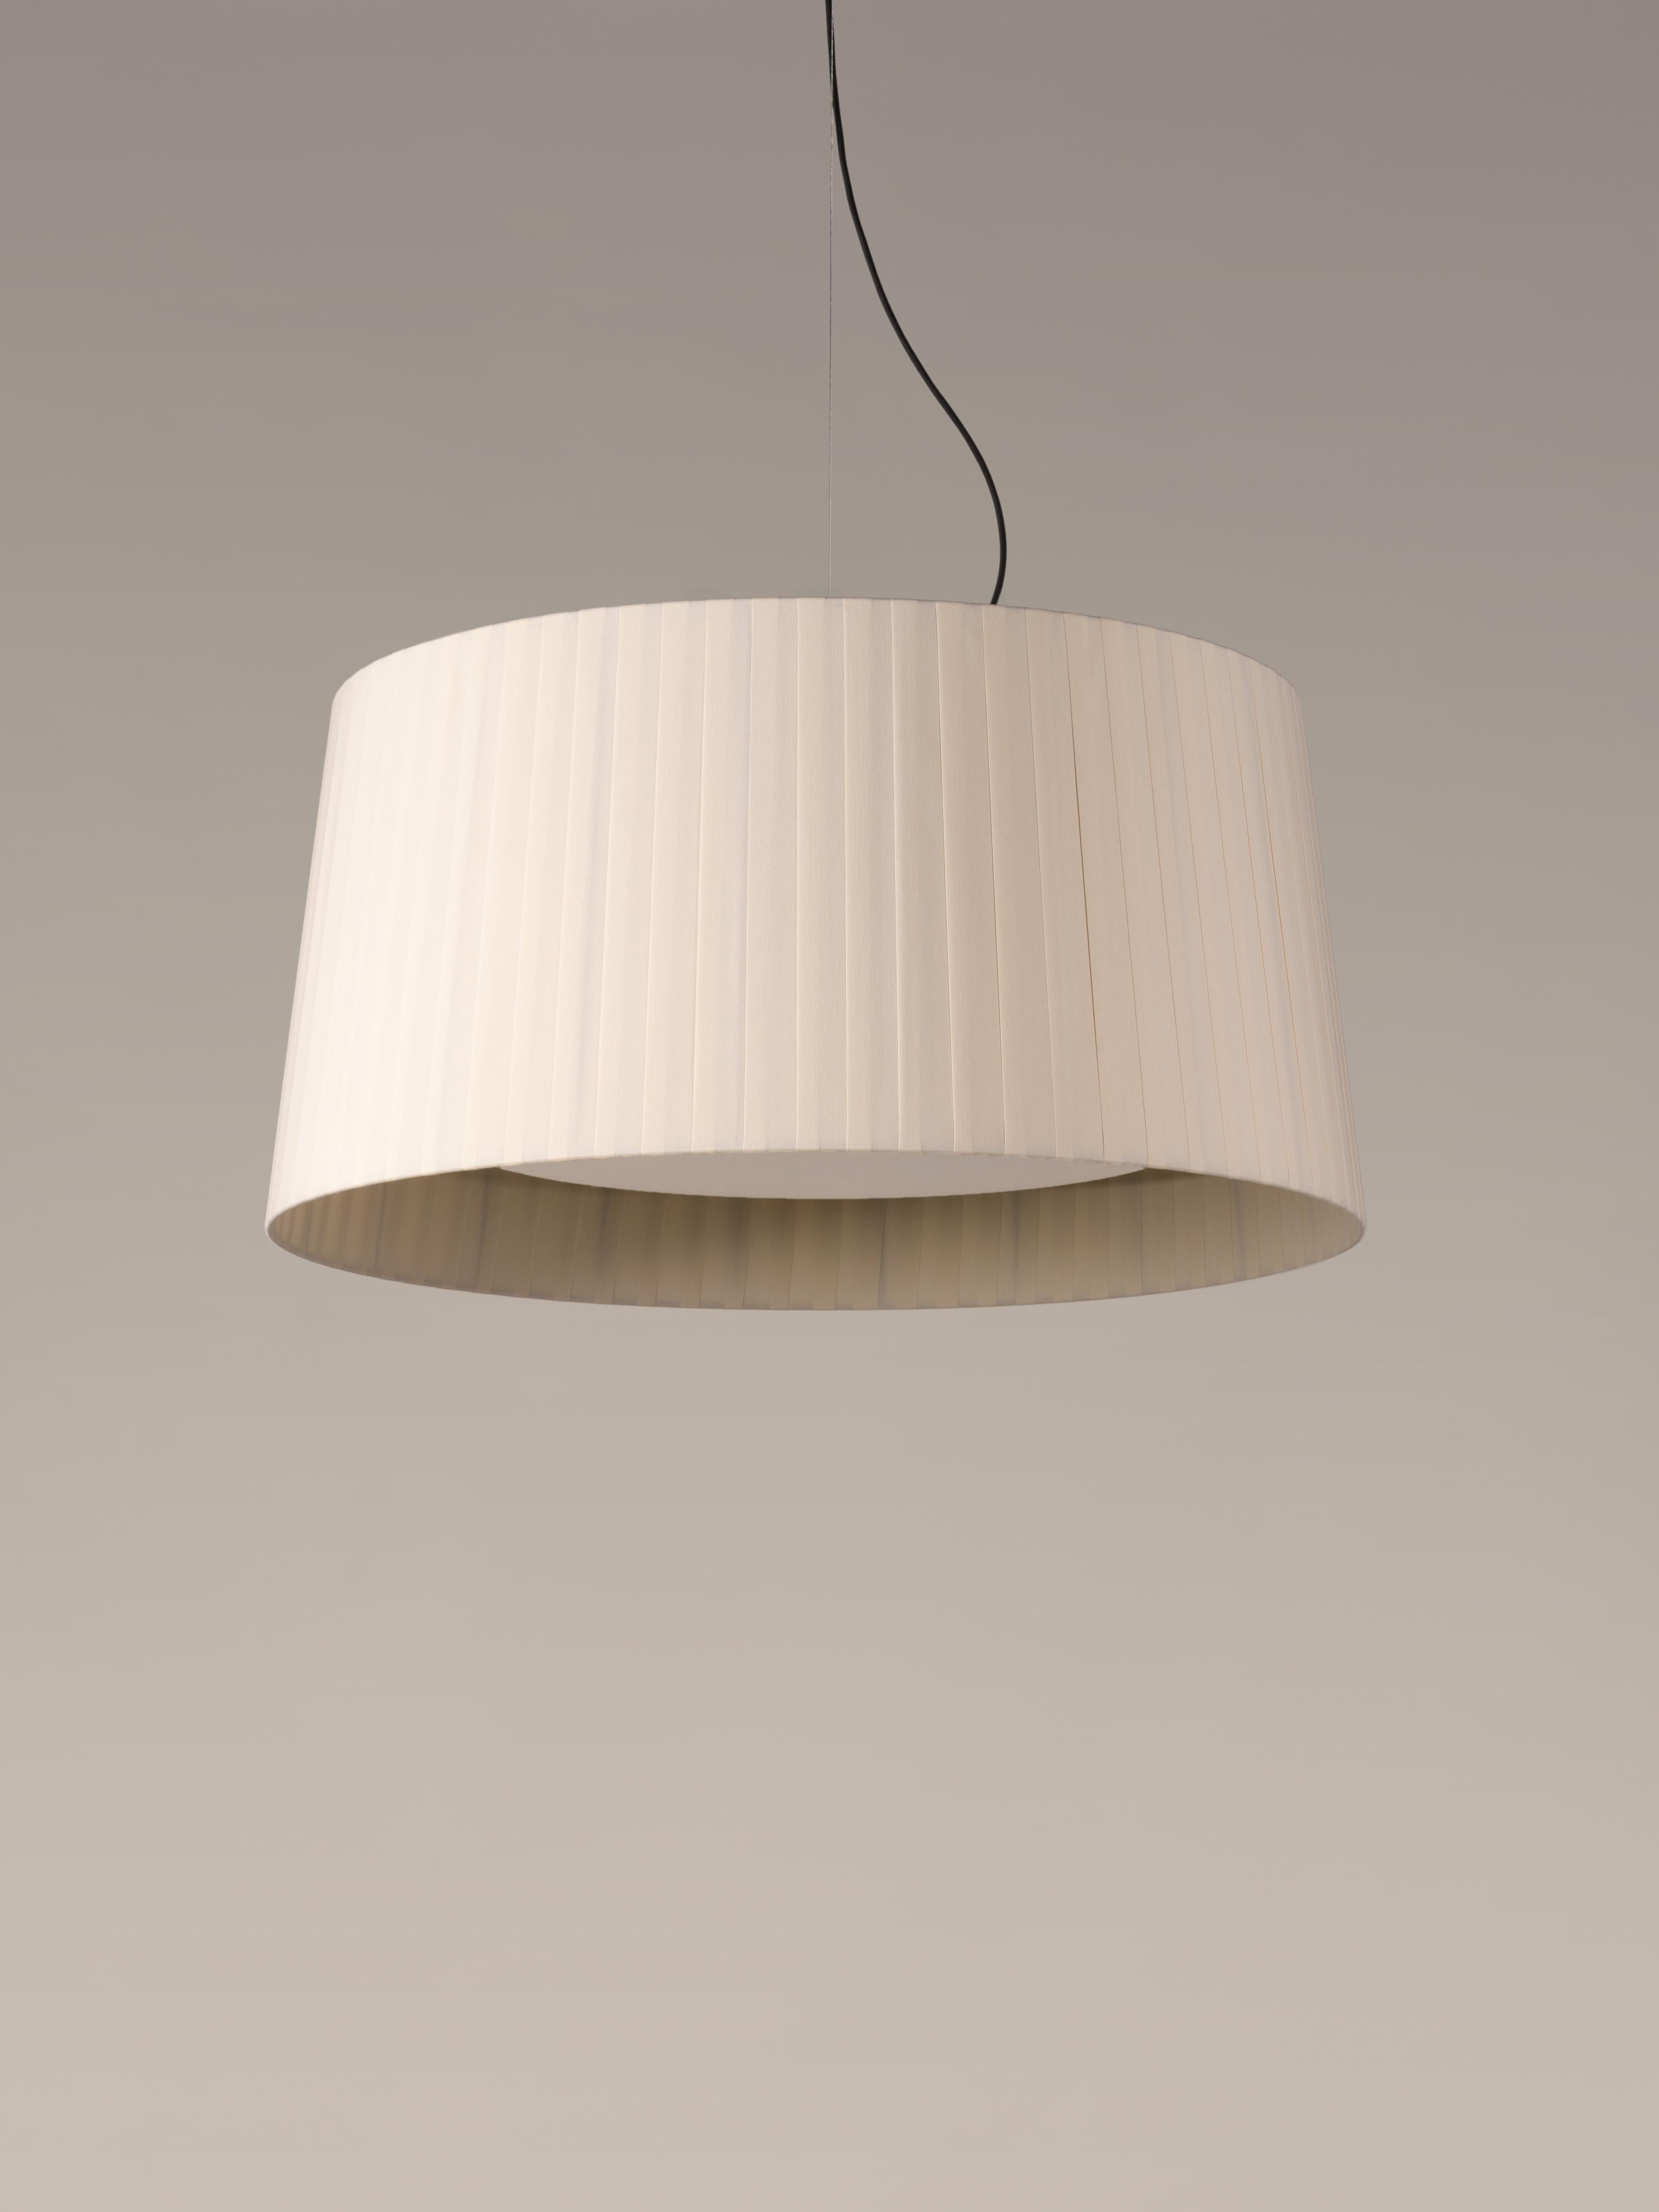 Natural GT7 Pendant Lamp by Santa & Cole.
Dimensions: D 90 x H 44 cm.
Materials: Metal, ribbon.
Available in other colors.

Designed for intermediate volumes and domestic areas, GT7 is larger, requiring a reinforced structure that adds a metal